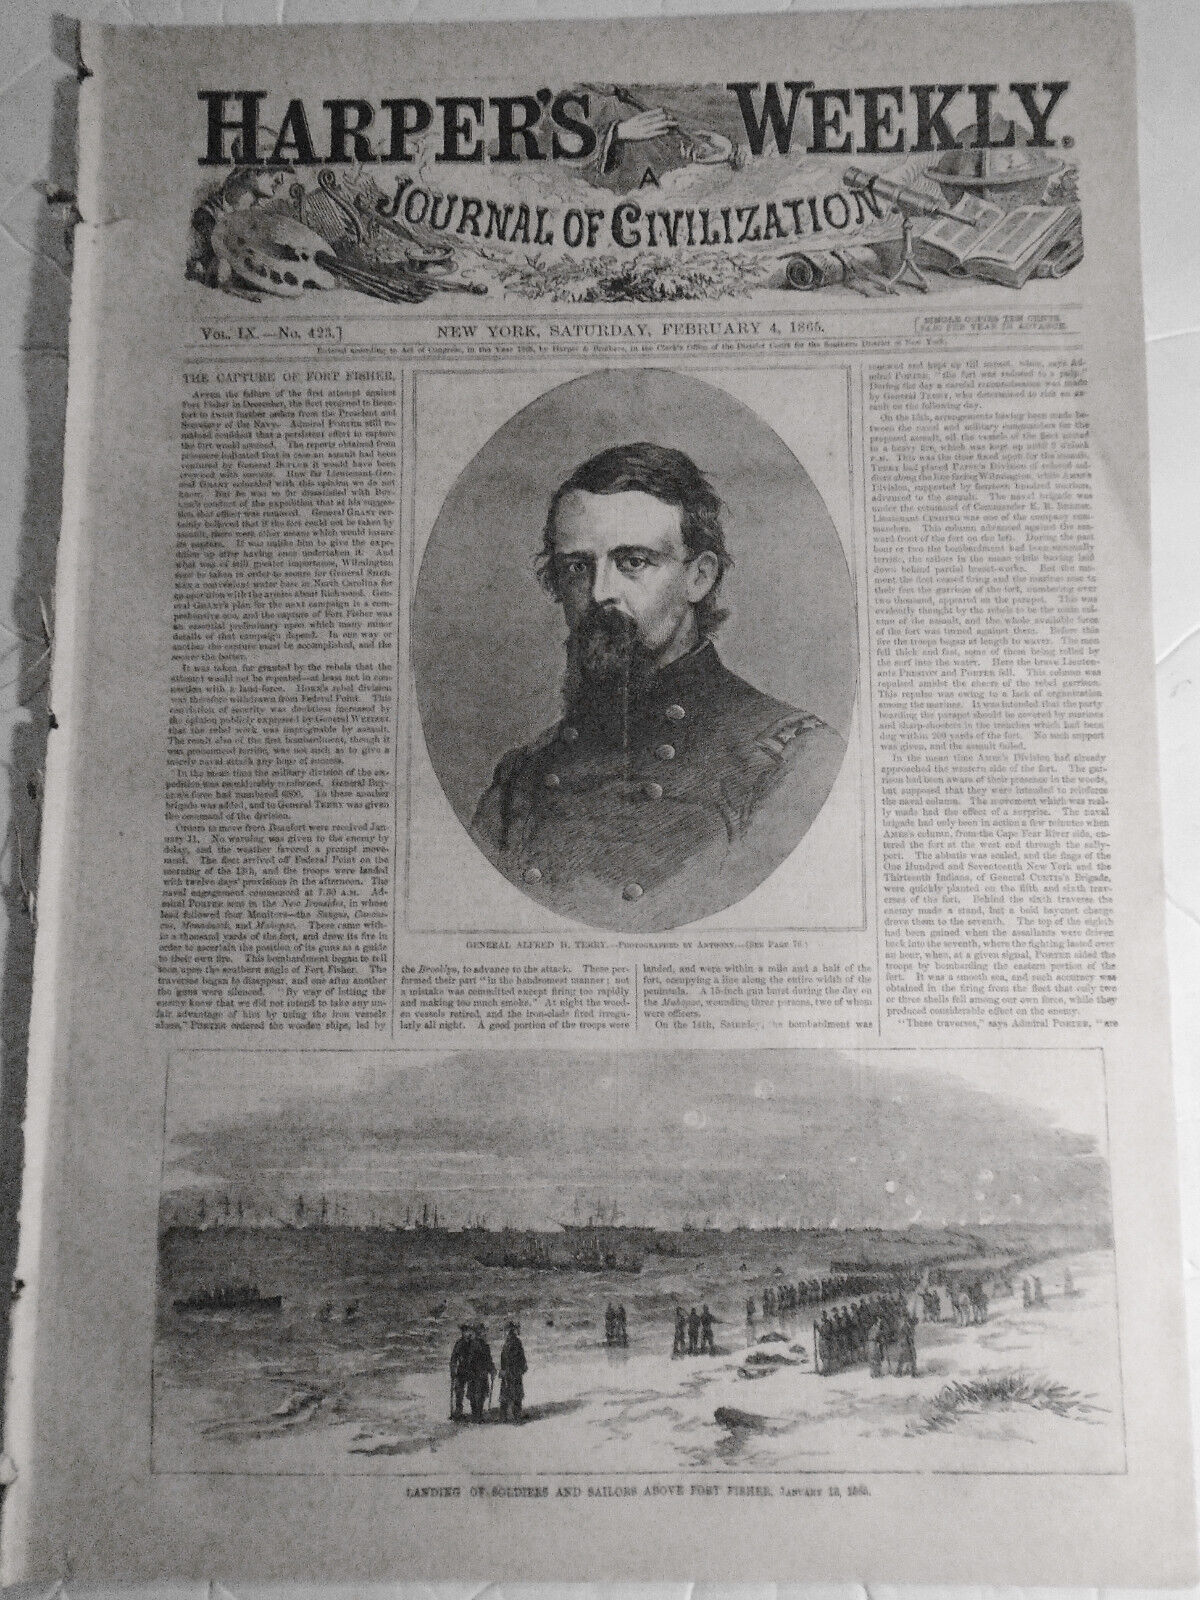 Harper's Weekly February 4, 1865  Union Army in Savannah - Complete Original